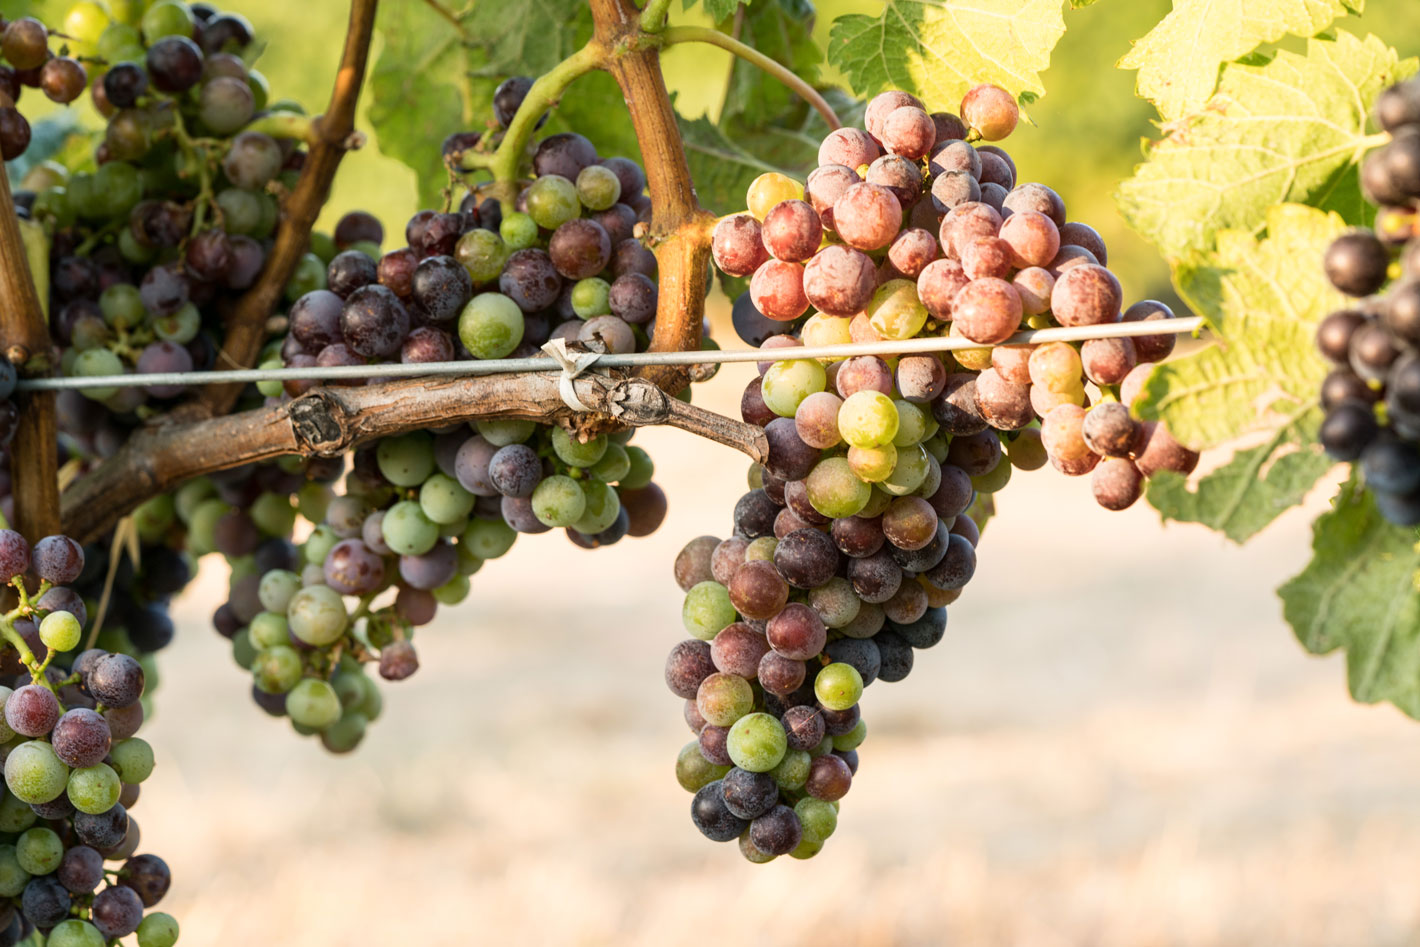 Veraison in the Cain Vineyard, photo by Mitch Rice